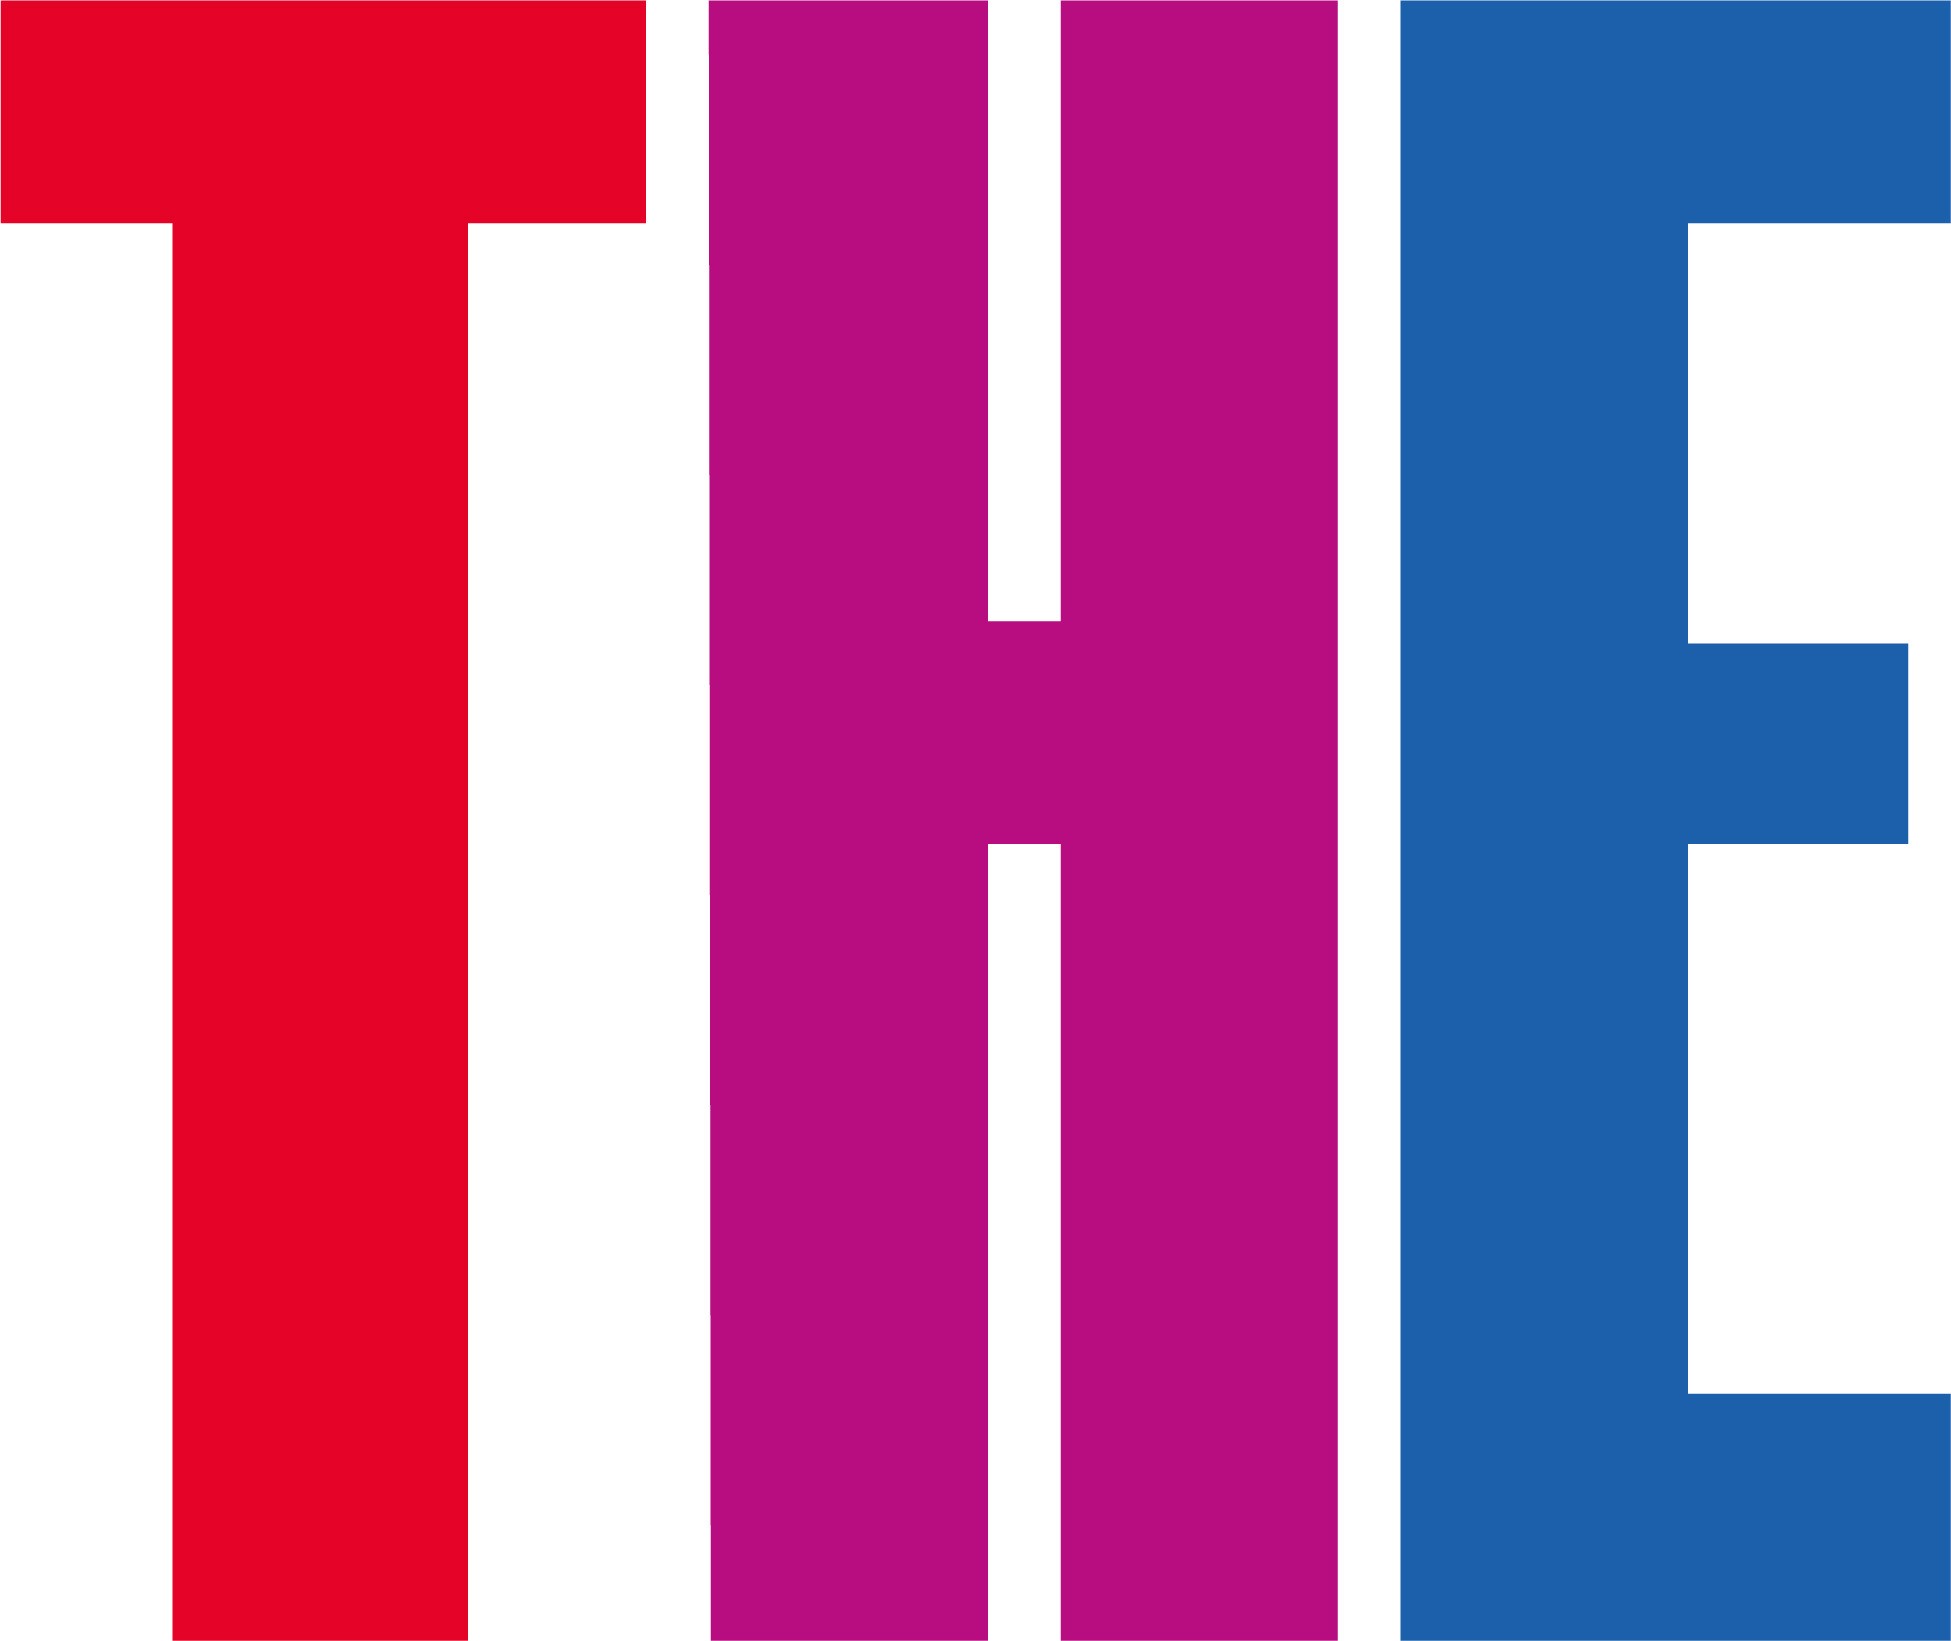 The Times Higher Education logo with a red T, purple H and blue E.